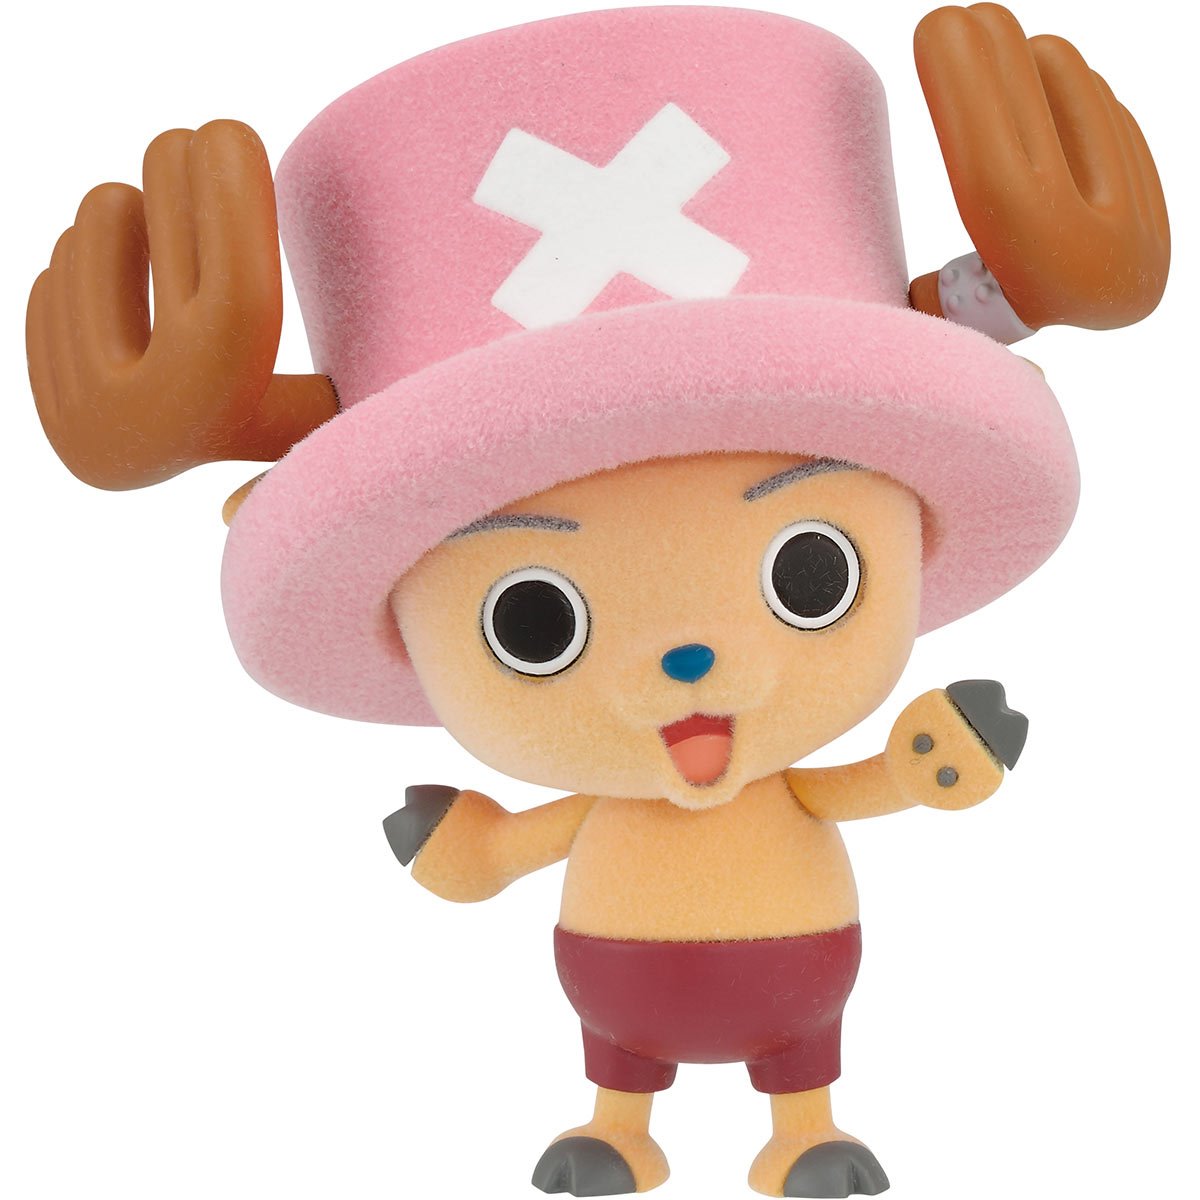 Chopper From One Piece